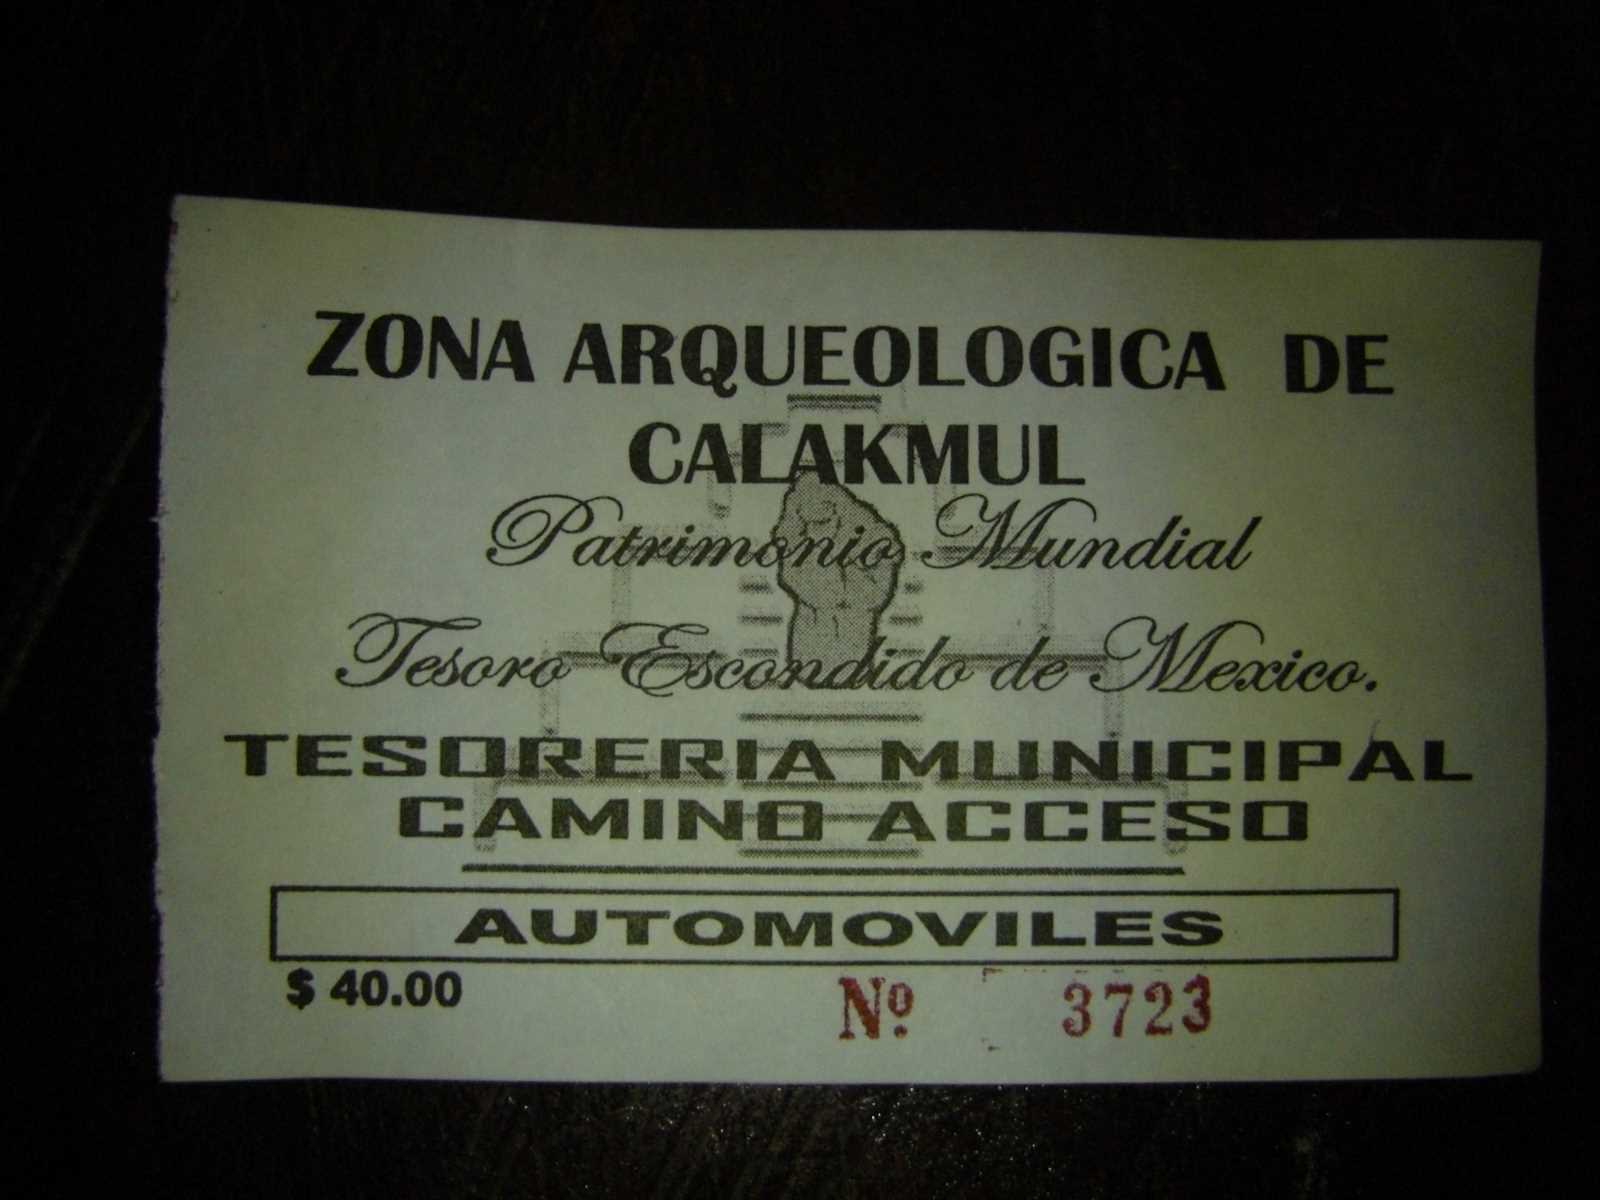 CIMG12
24 receipt for road use
